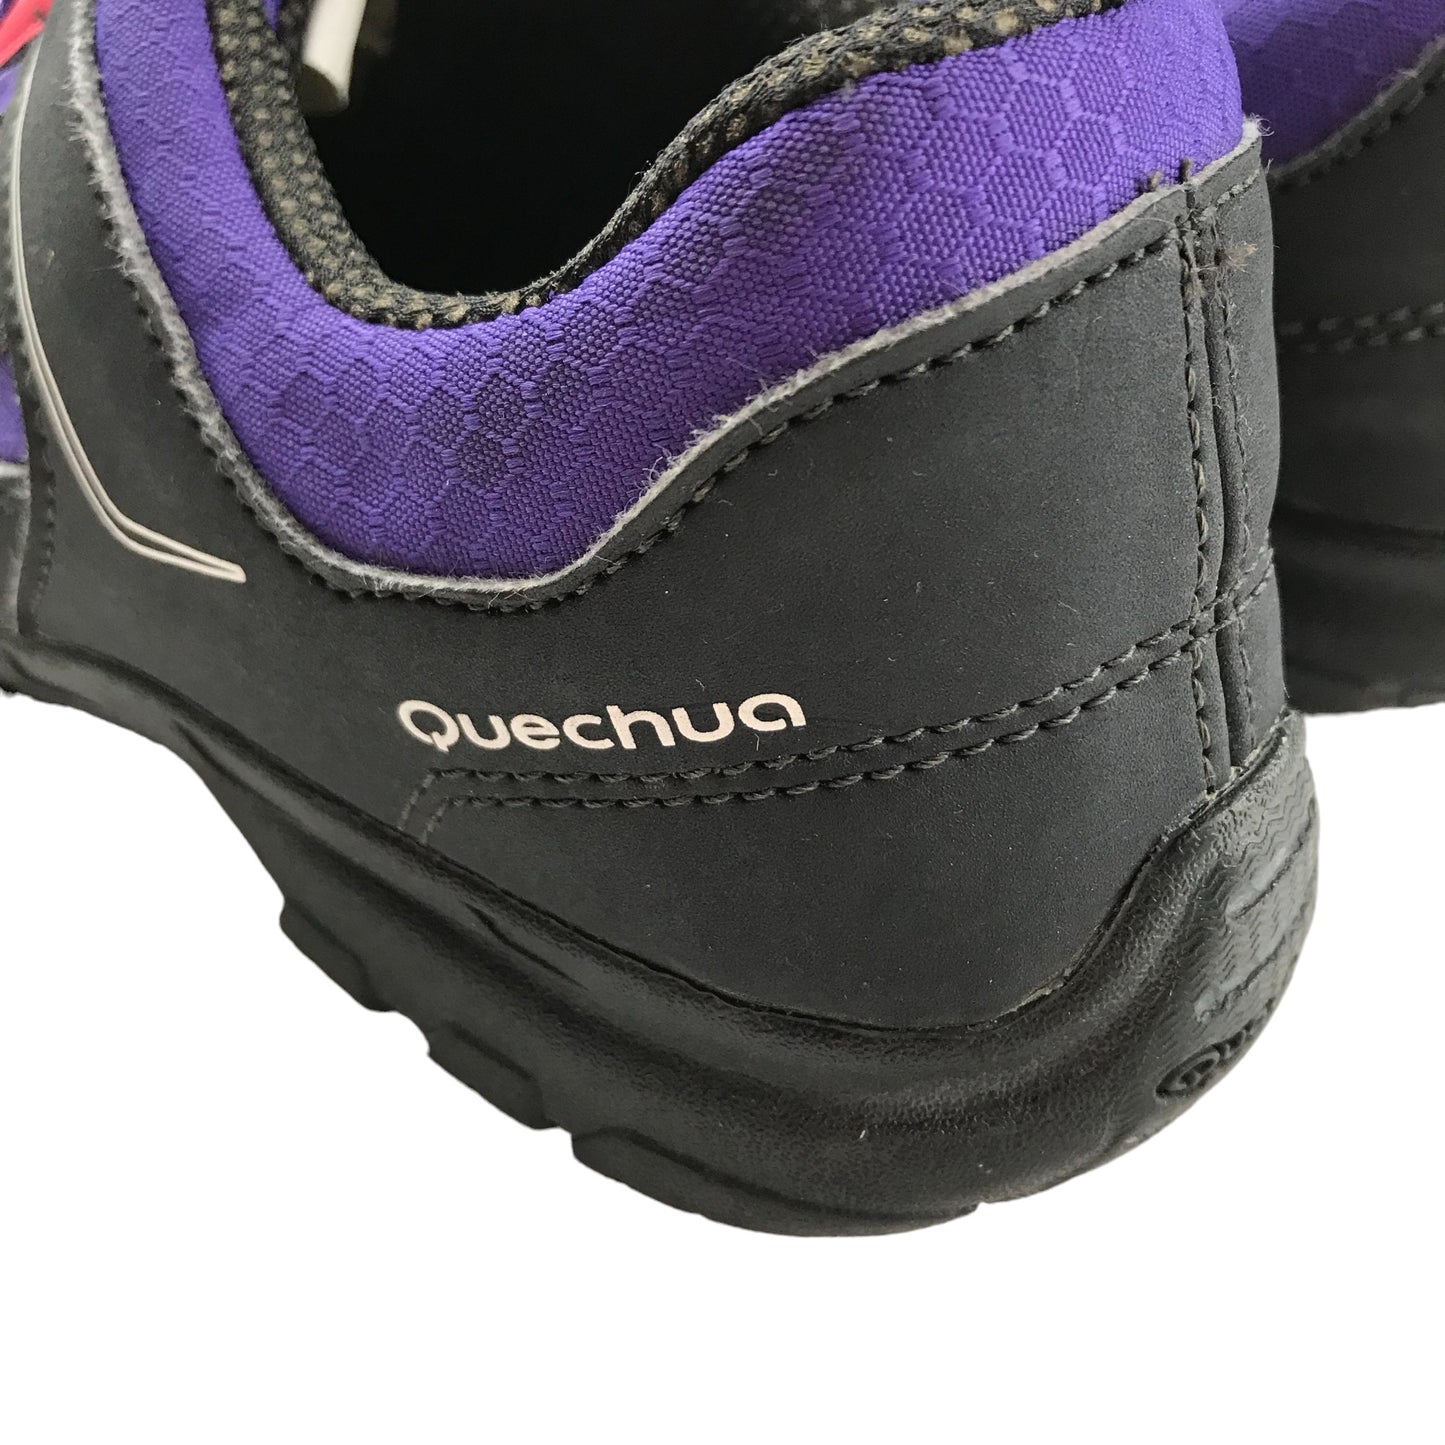 Decathlon Walking Shoes Shoe Size 4 Purple and Pink Novadry with Laces